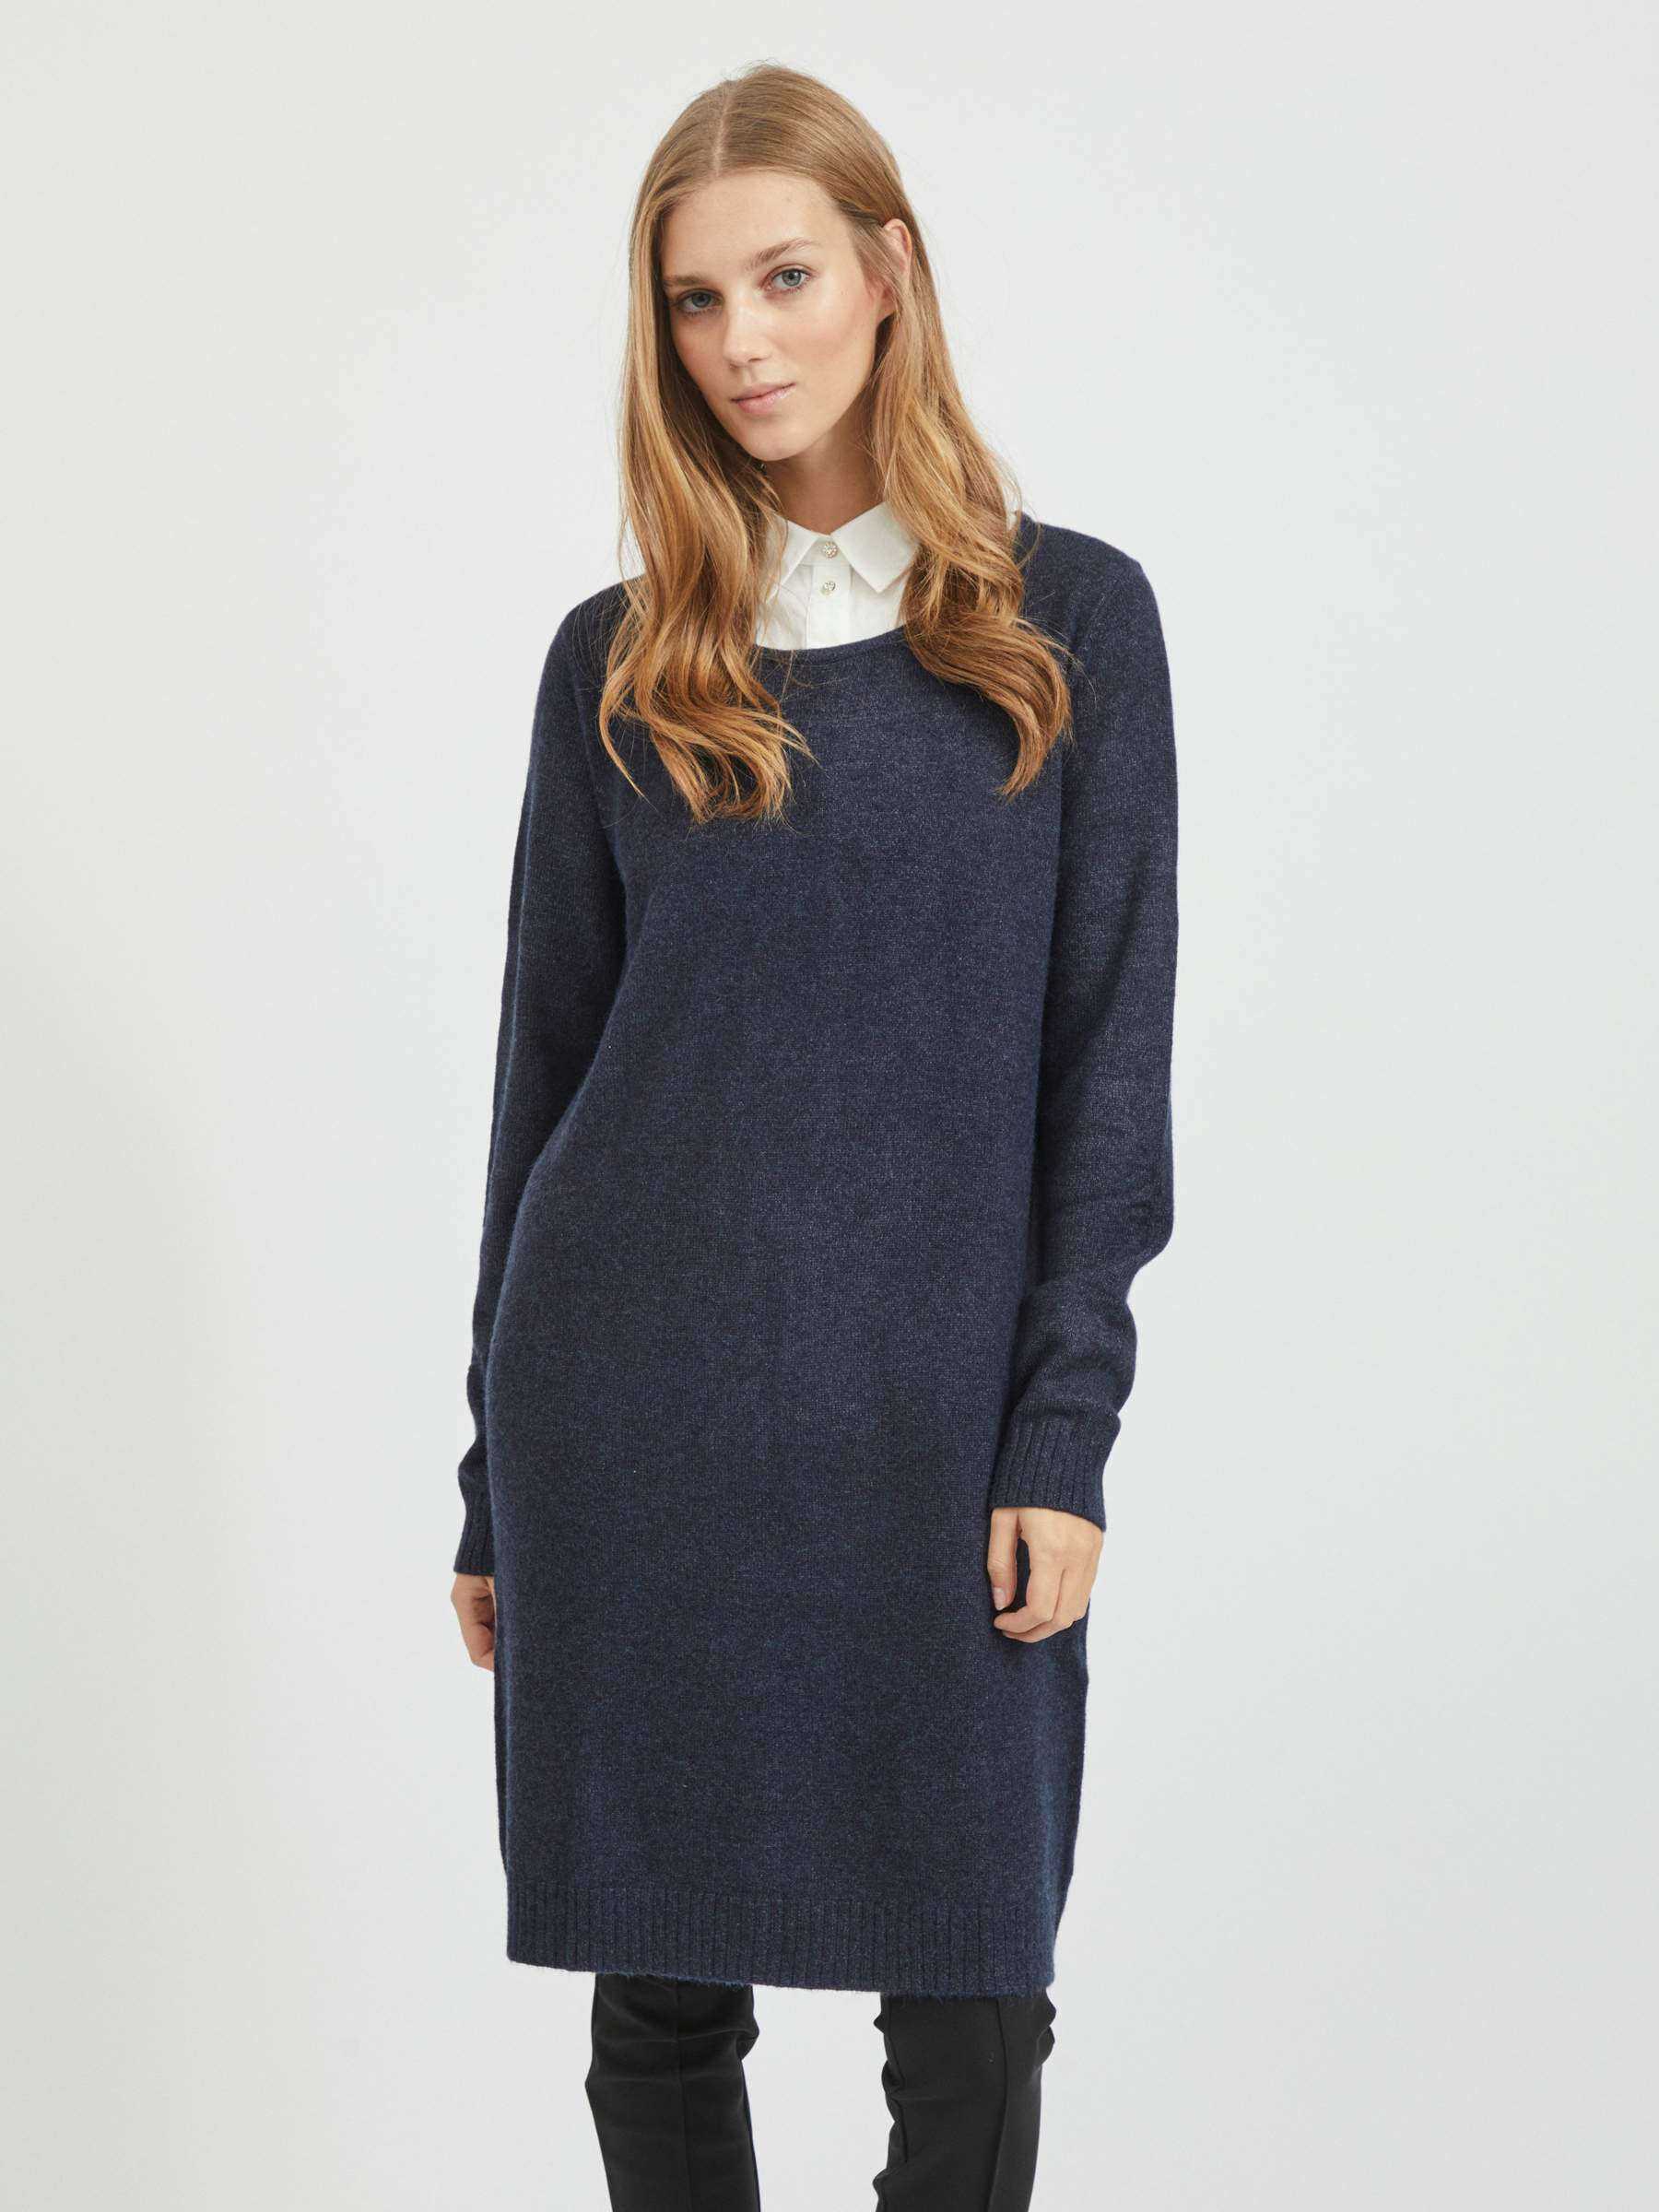 Knit Dresses For Winter - Warm And ...